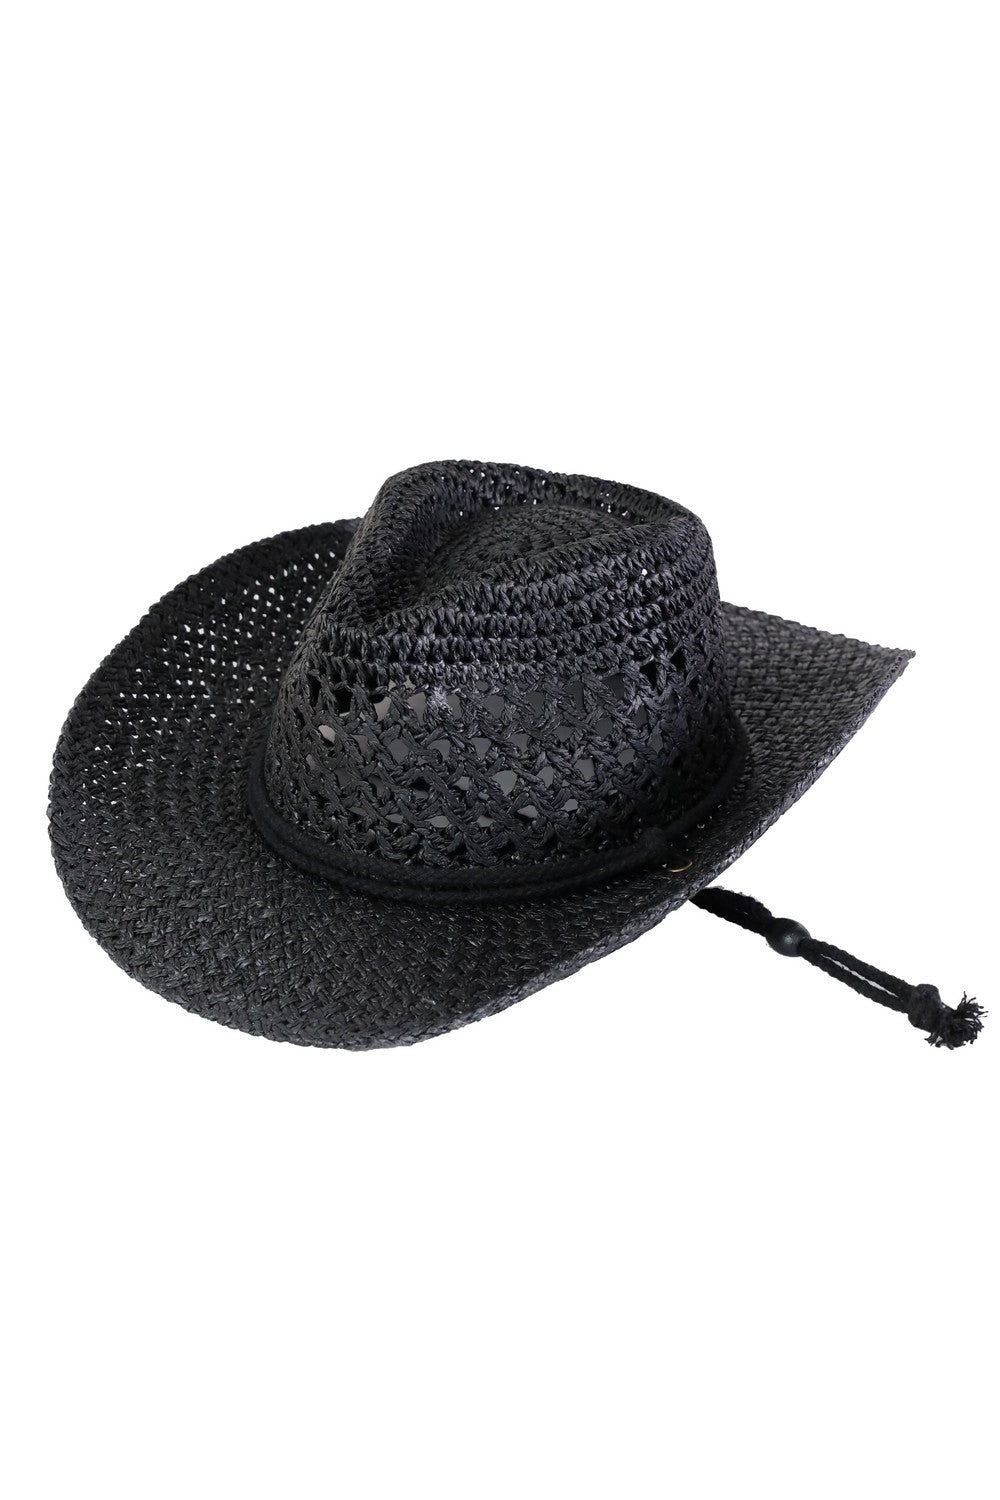 Straw Cowboy Cowgirl Handmade Hat with Chin Strap Black - Pack of 6